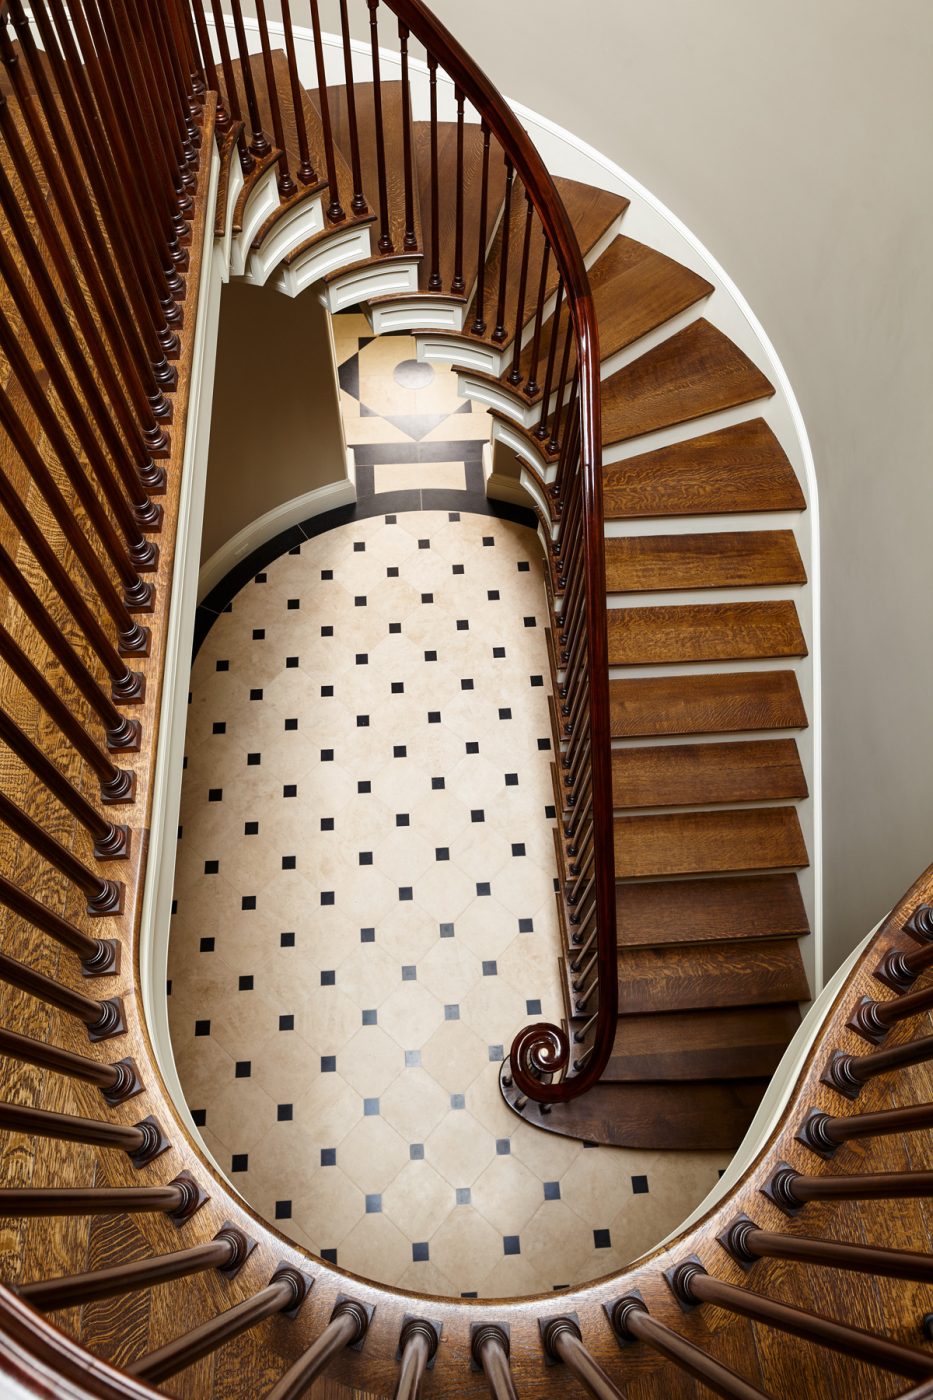 Bird's eye image of oval stair hall in Dutchess County New York Regency-style home by Gil Schafer III in his new book Home at Last: Enduring Design for the New American Home Rizzoli publisher written with Mark Kristal